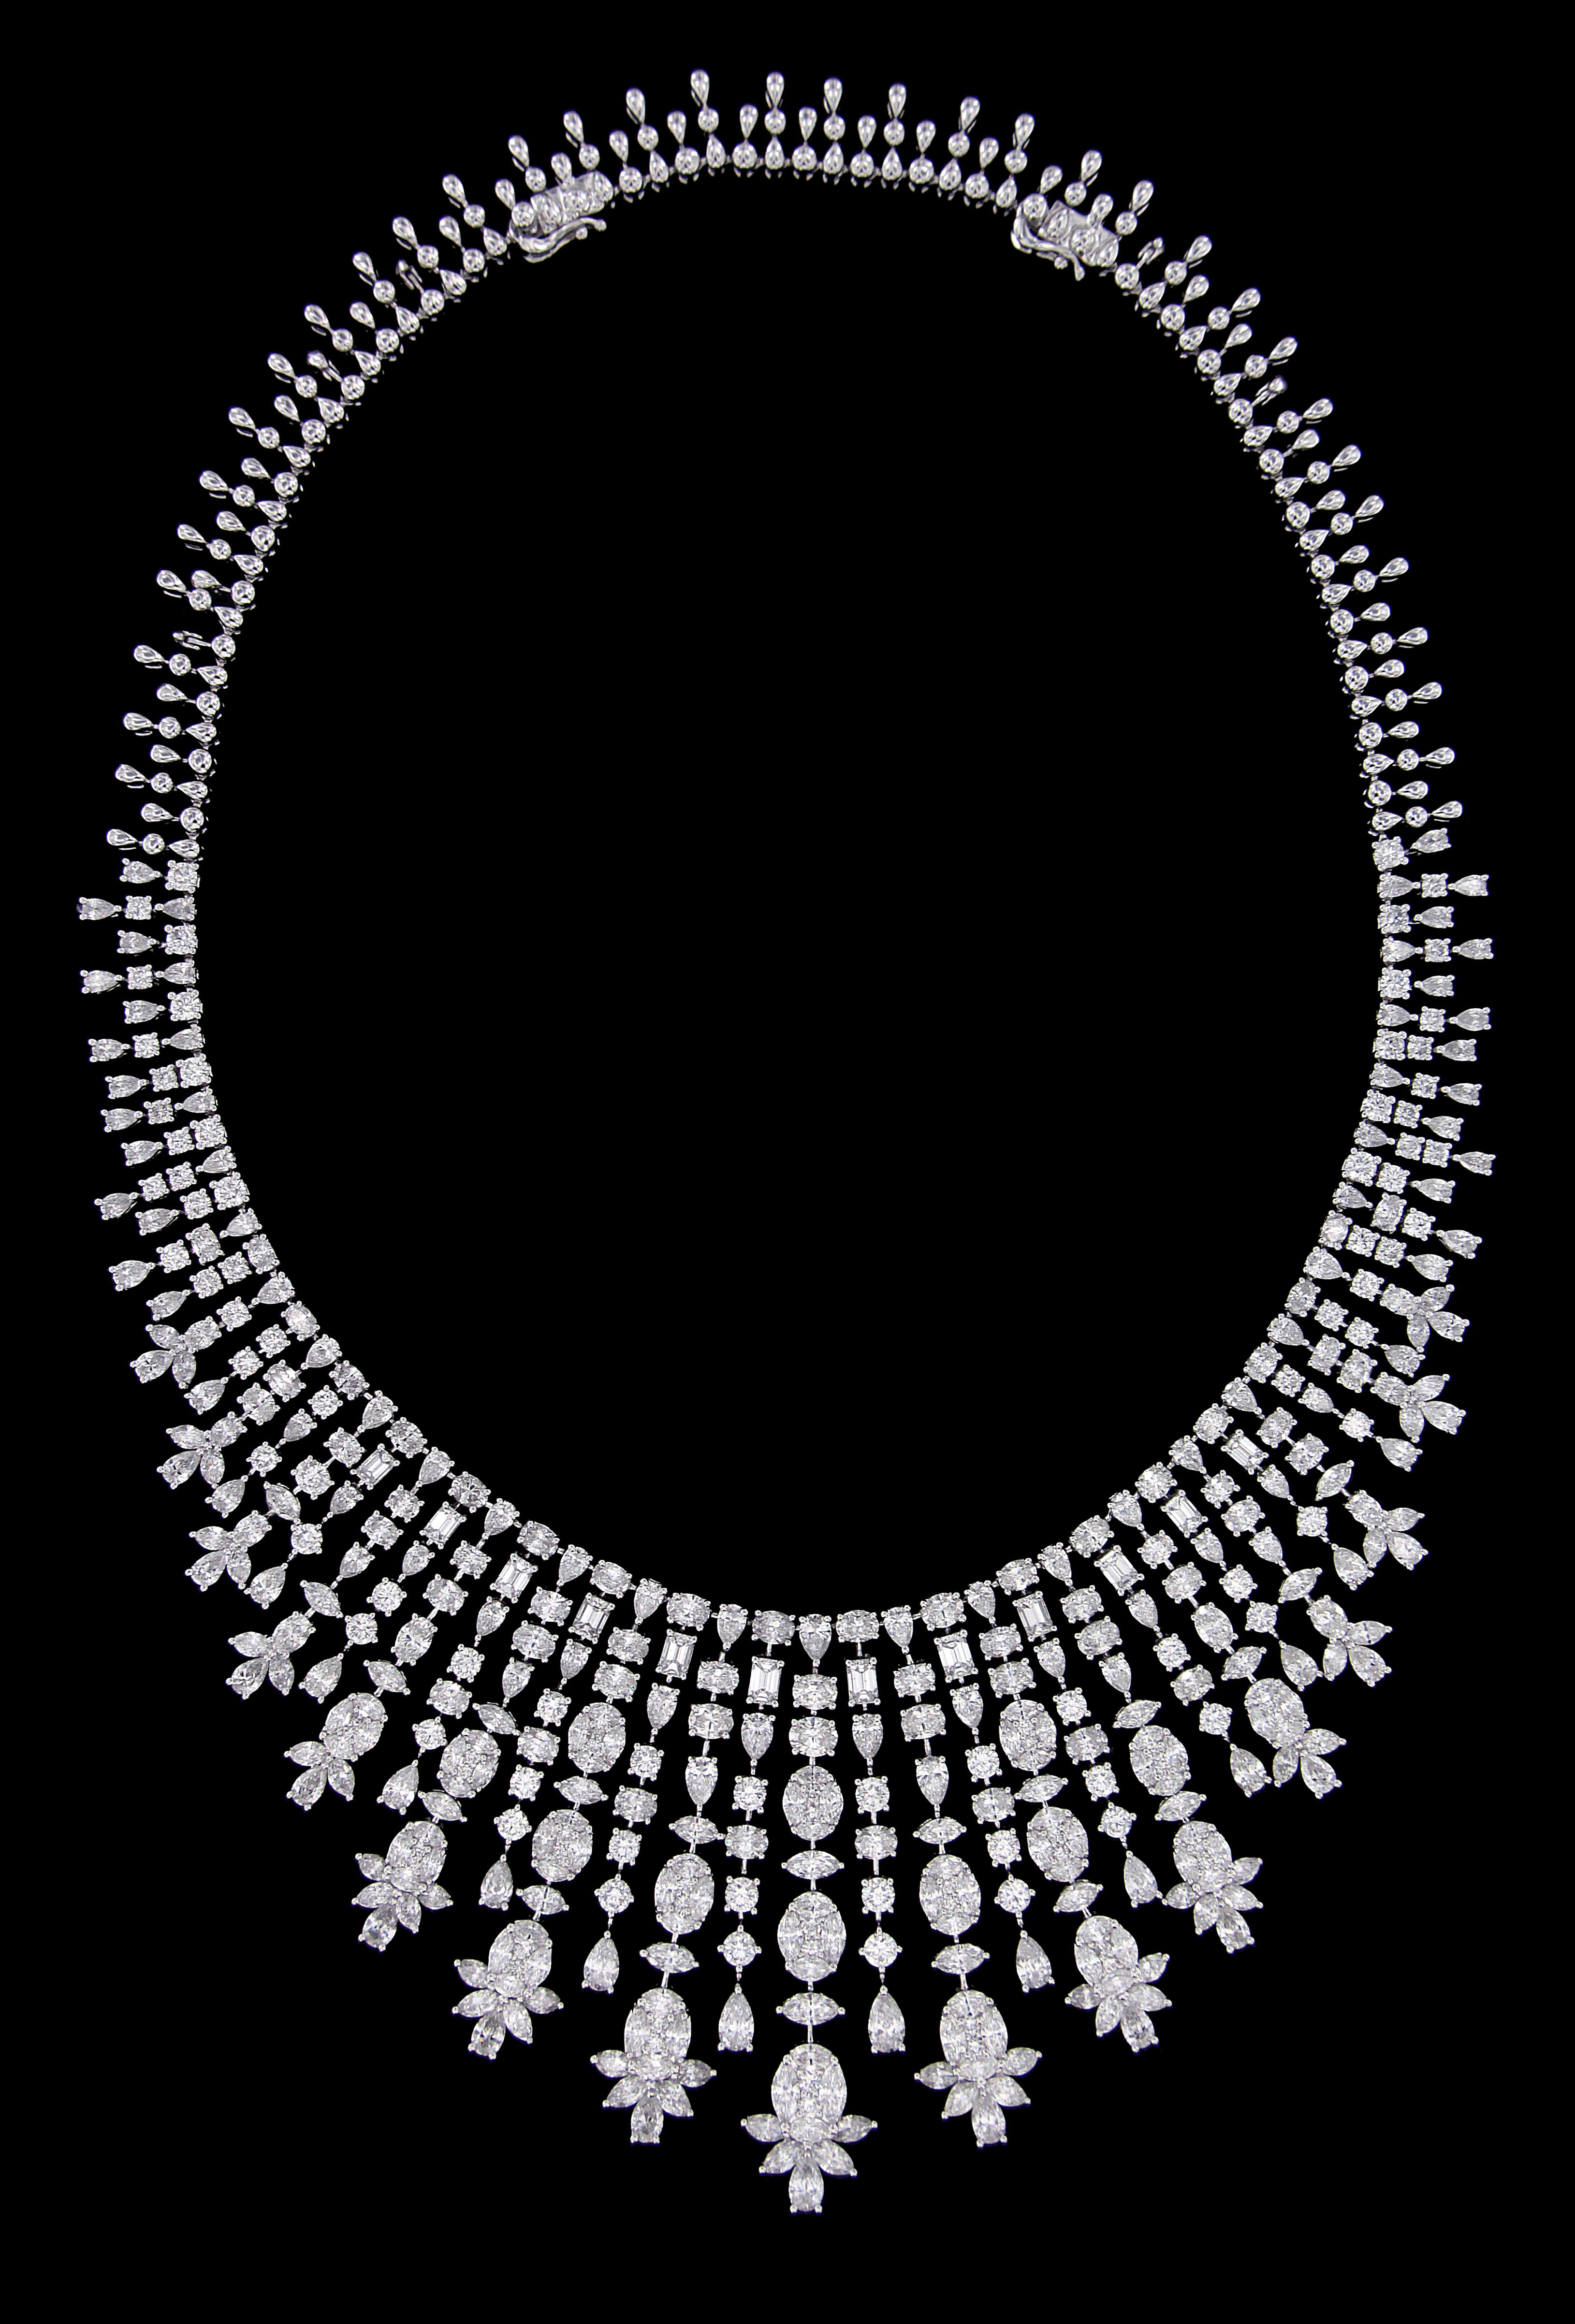 Dazzling 18 Karat White Gold And Diamond Necklace

Diamonds of approximately 39.086 carats mounted on 18 karat white gold and diamond necklace. The Necklace weighs approximately 96.013 grams.

Please note: The charges specified do not include any